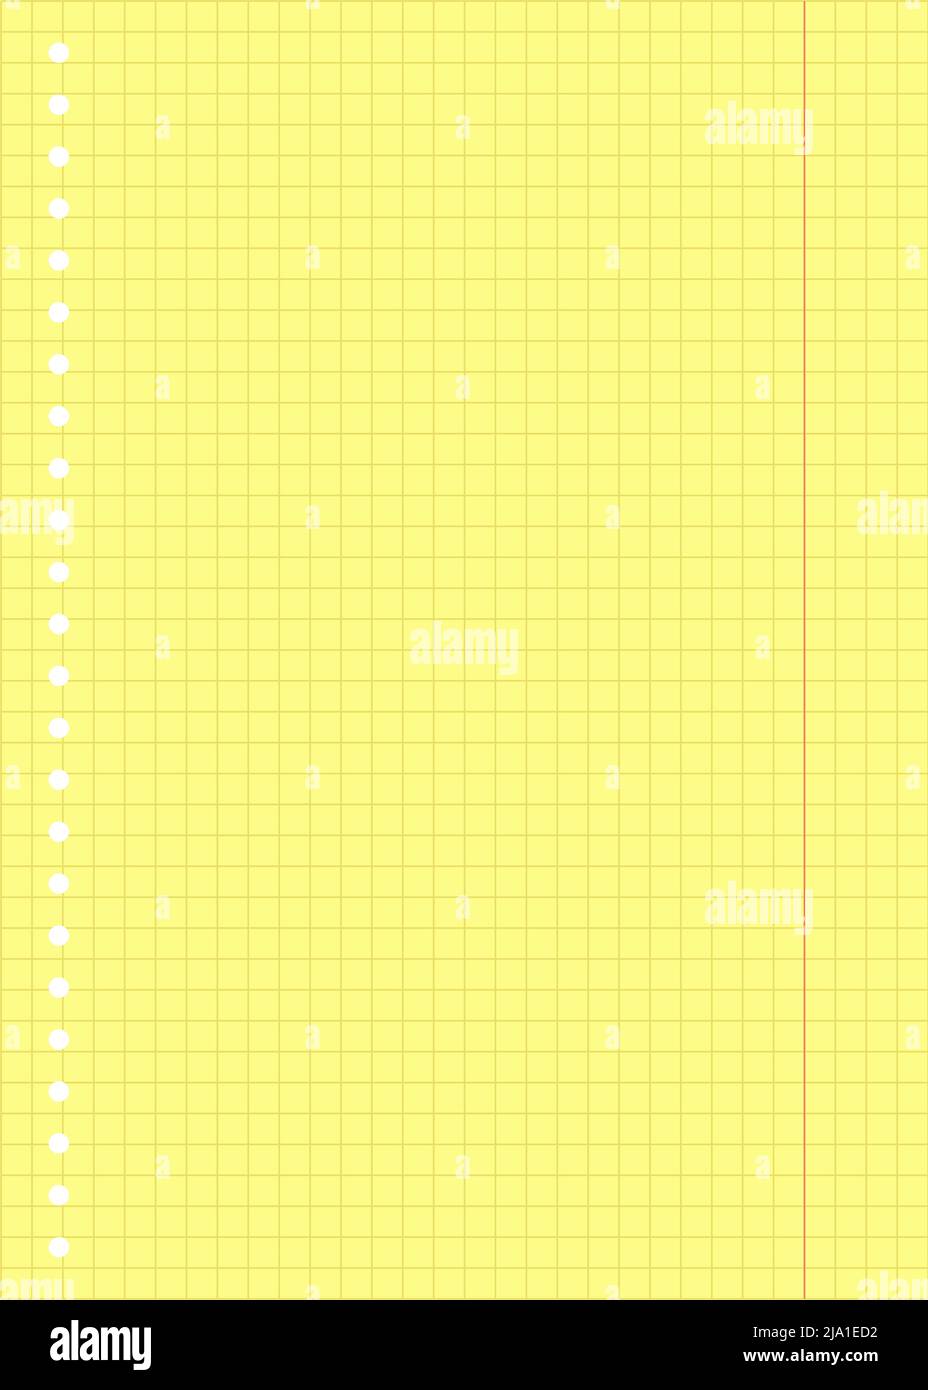 Blank notebook sheet with margins and yellow squares with holes for stitching For planner, school, print A5 Checkered pattern Papers homework and exer Stock Vector